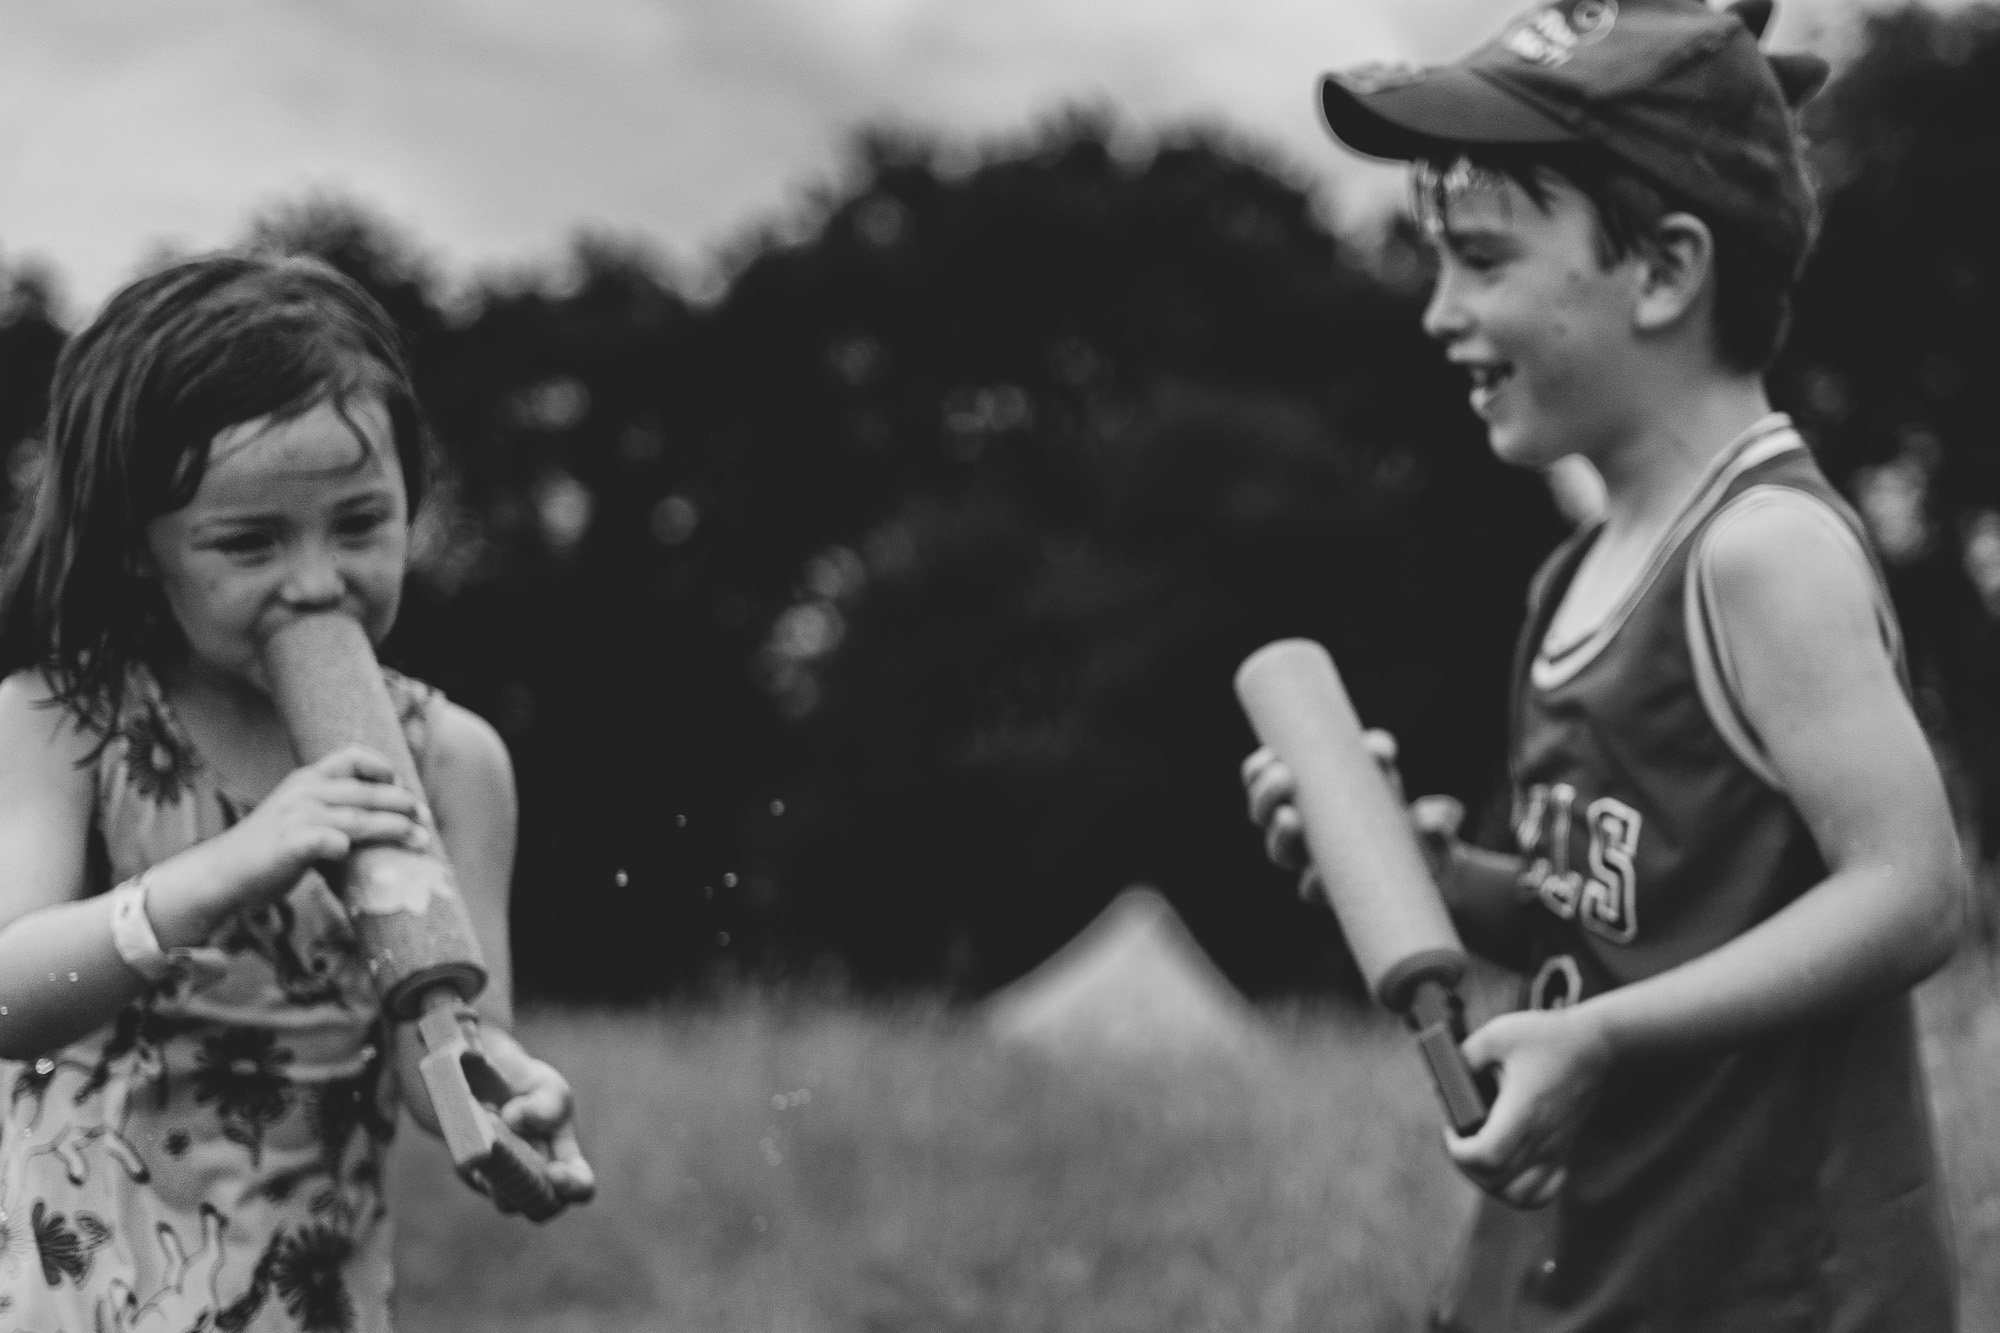 boy-and-girl-water-guns-summer-sussex-family-photographer-black-and-white-family-portrait.jpg